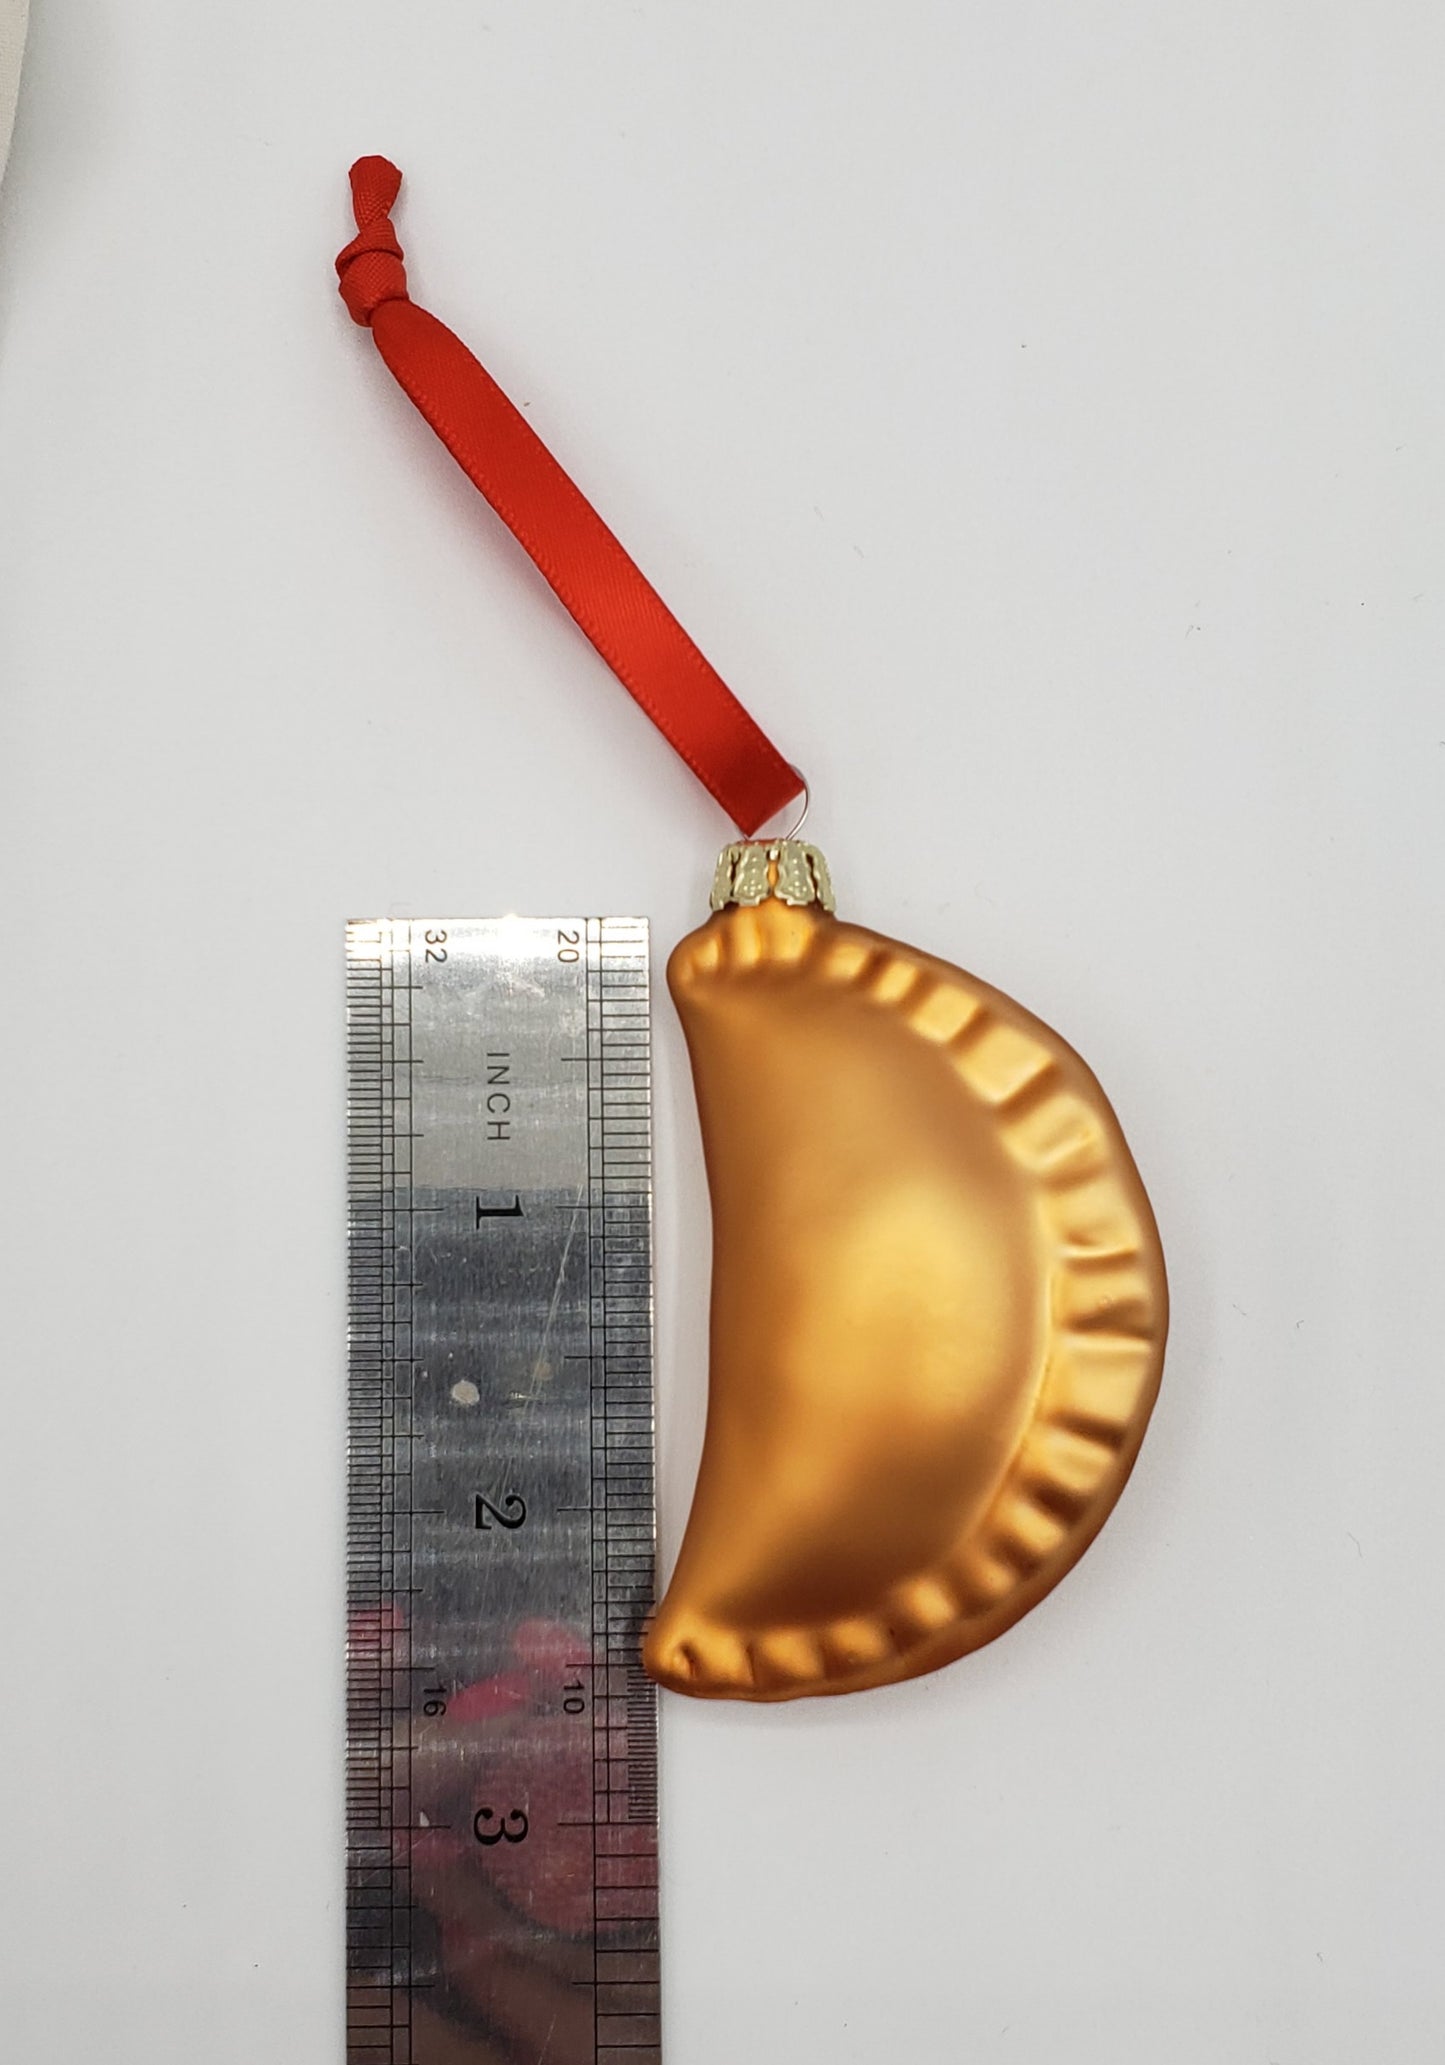 Case of Pierogi Shaped Ornaments - Whole Sale Only